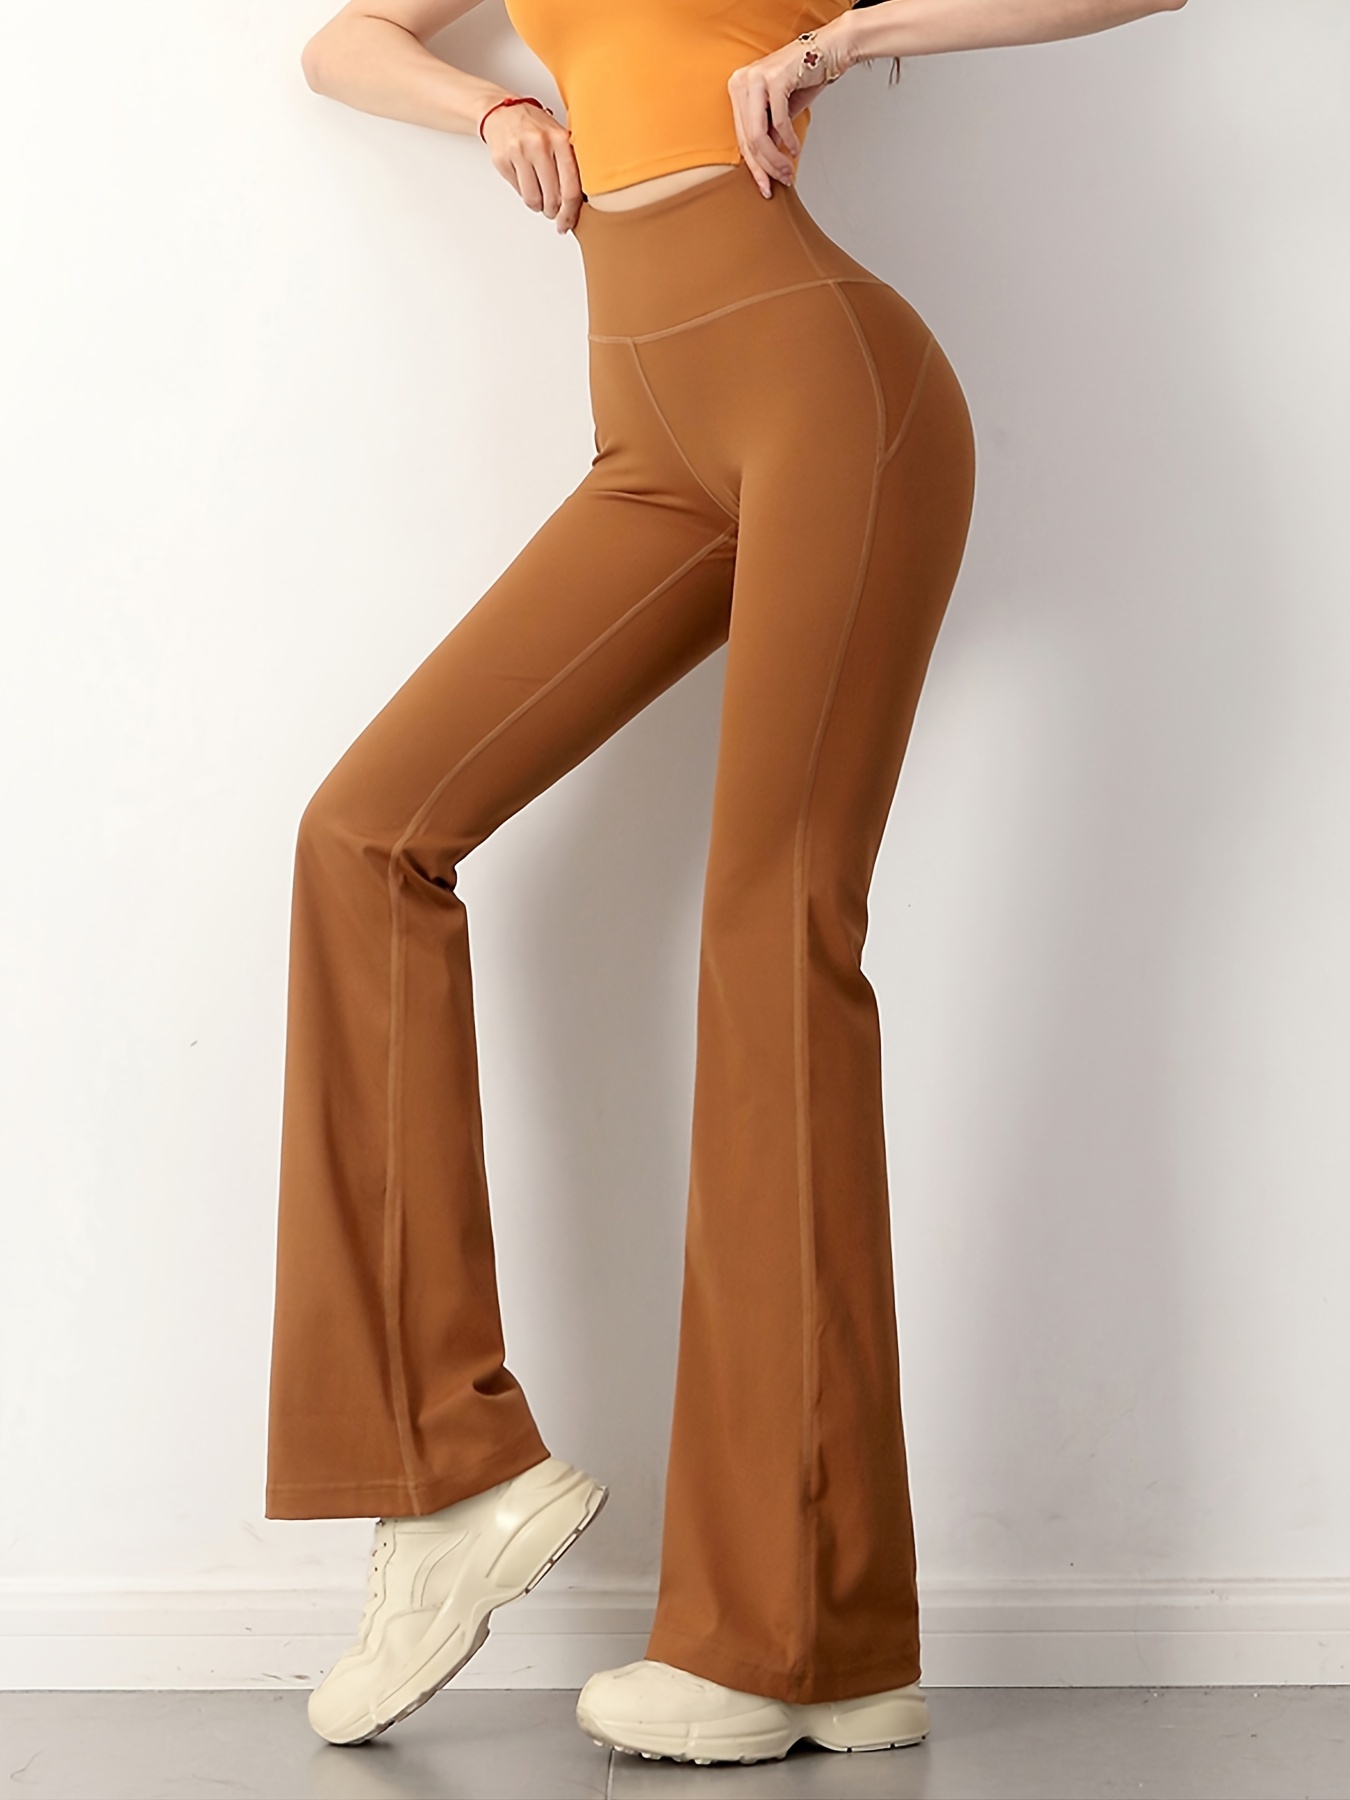 Buy FITHUB Bell Bottom Trousers for Women with high Waist Online